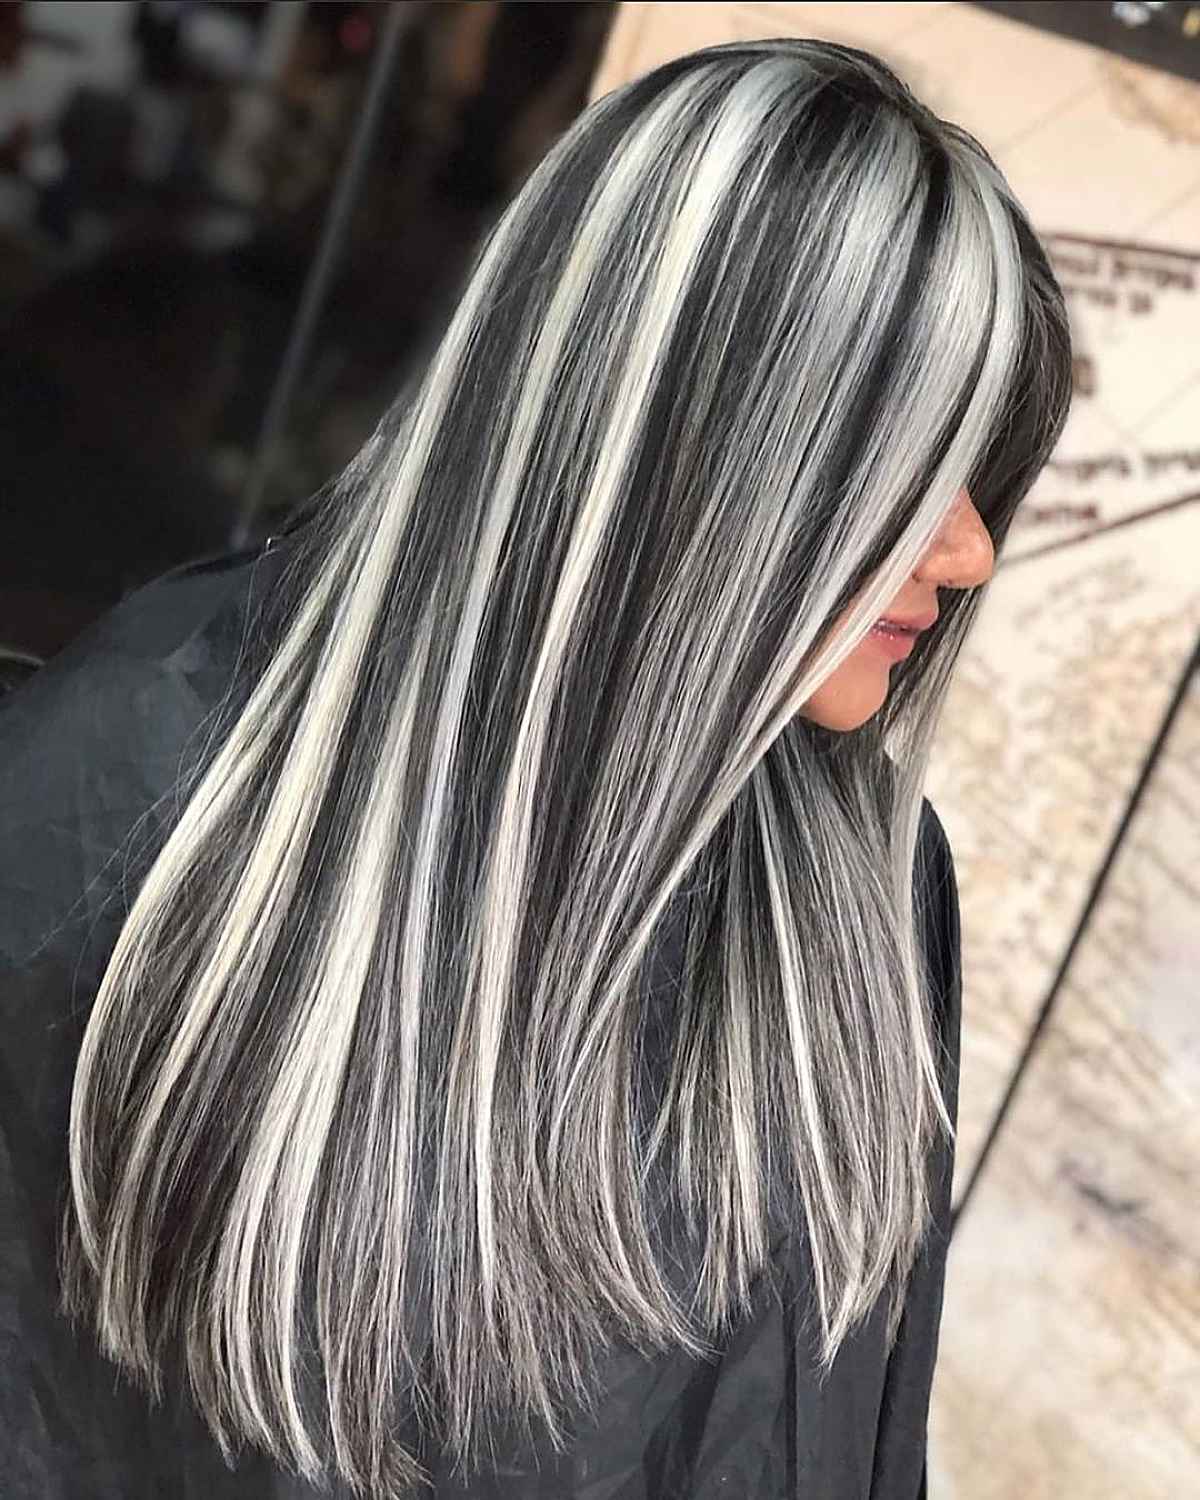 Long Haircut with Black and Blonde Hair